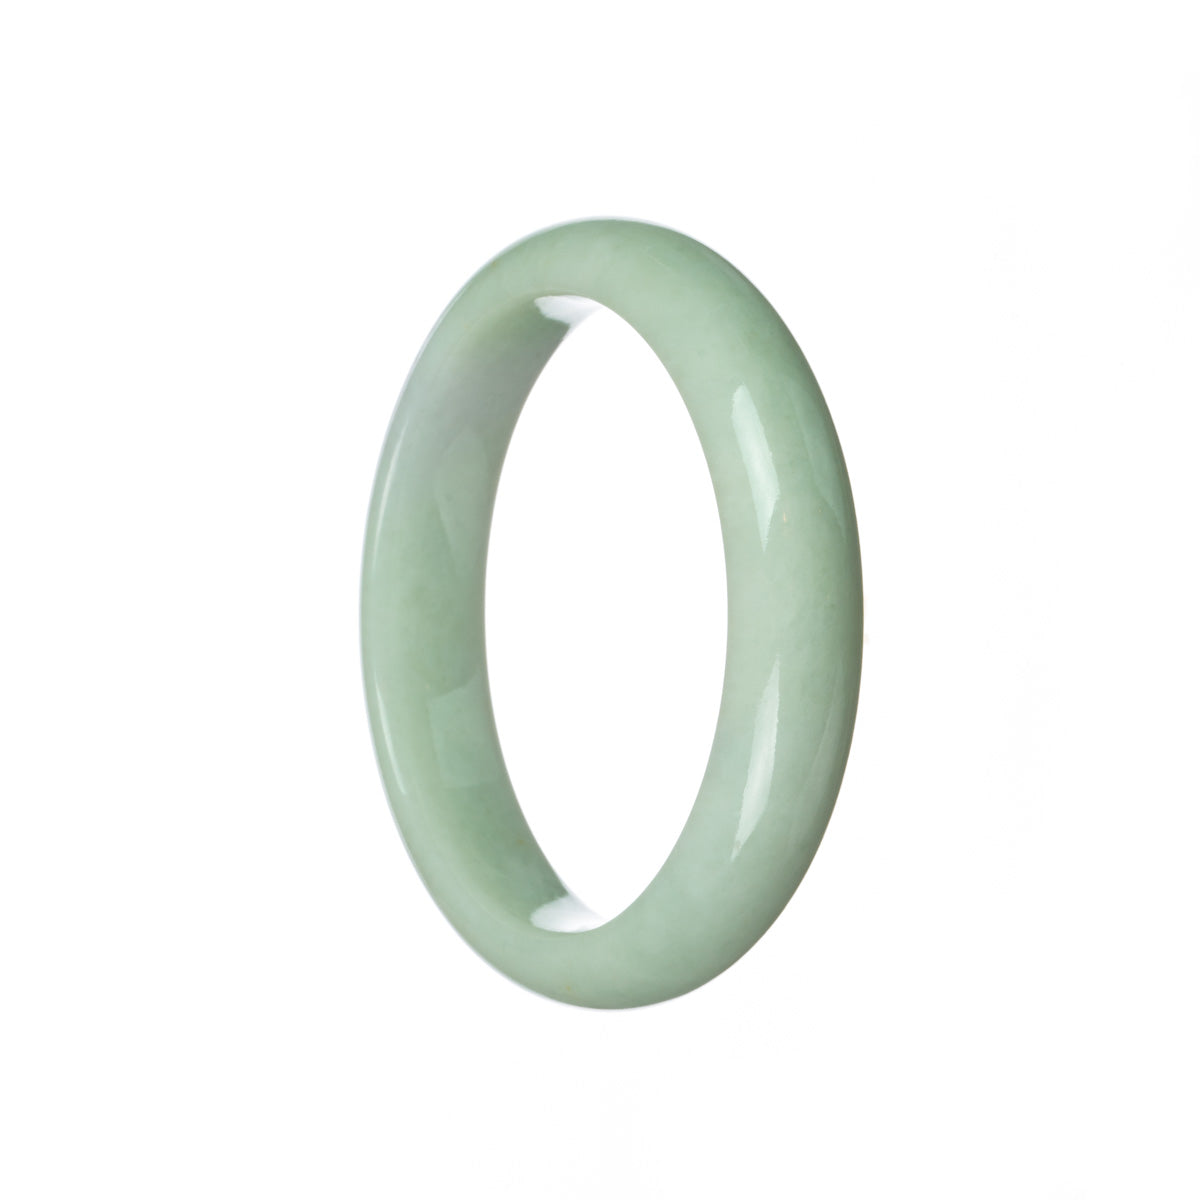 A light green Burmese jade bangle with a half moon shape, 60mm in size, certified as Type A. Sold by MAYS.